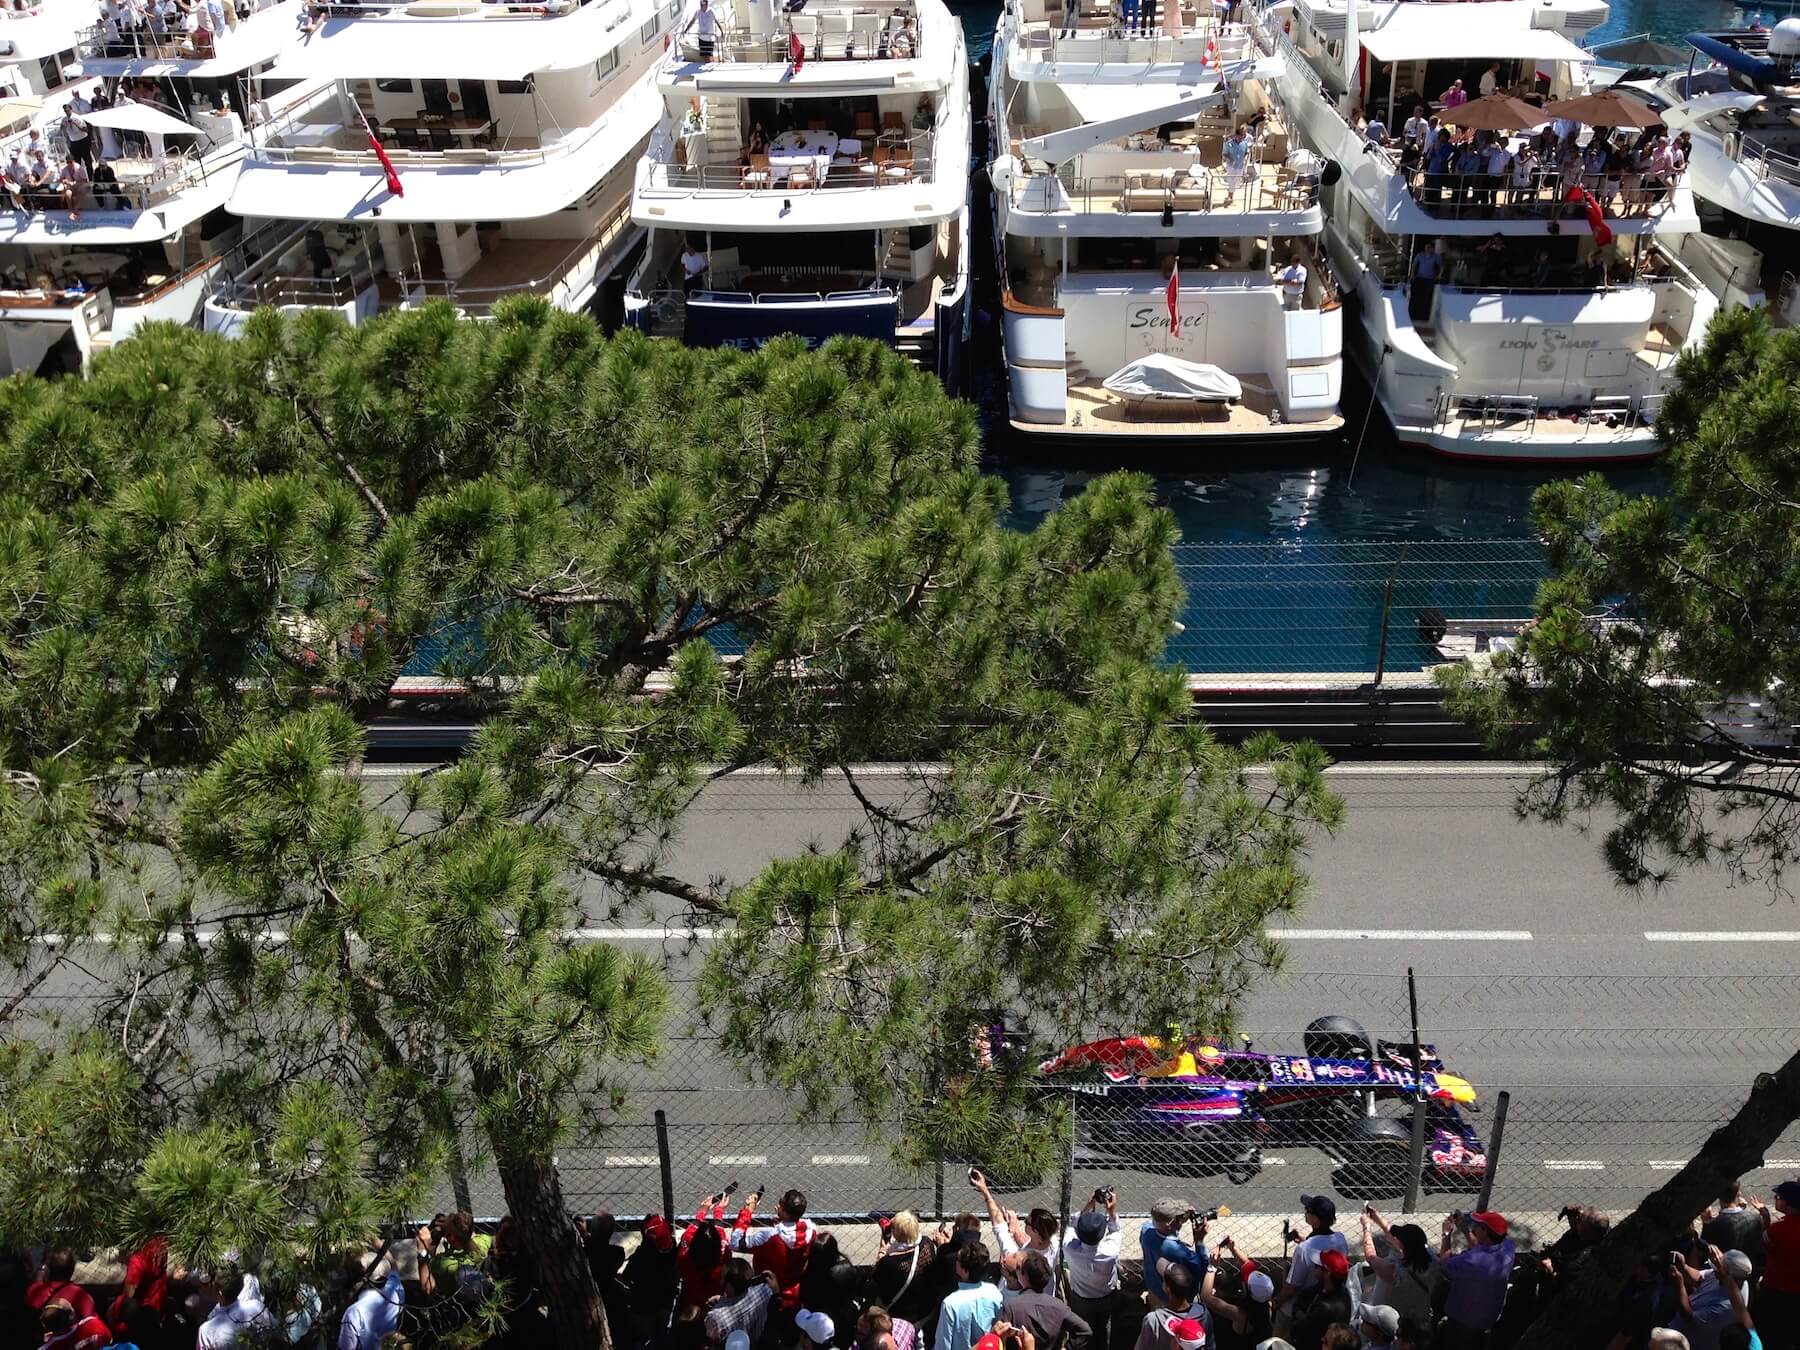 Red Bull F1 car in front of luxury yachts at Monaco GP